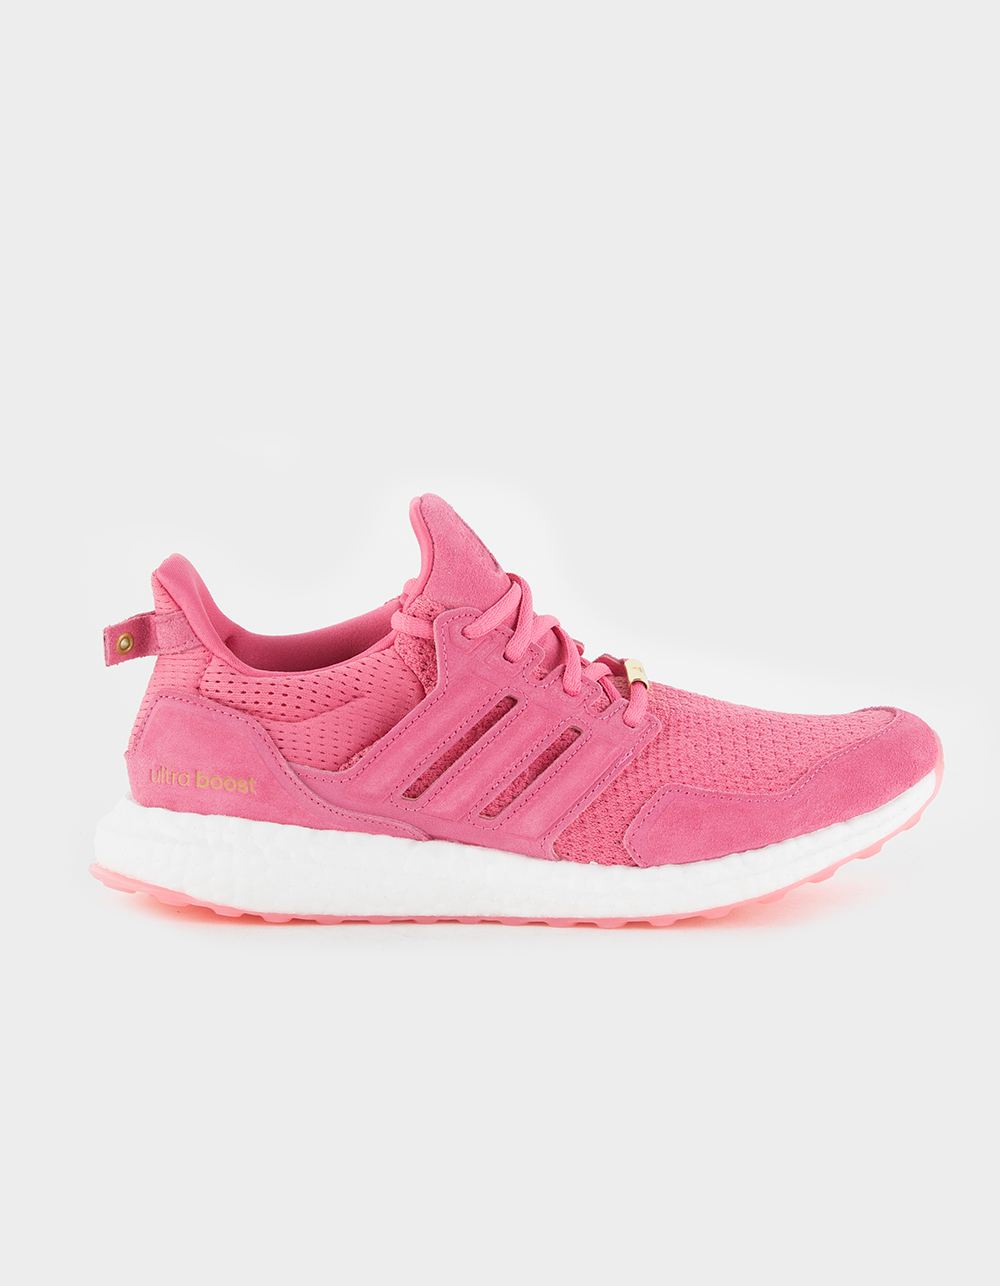 Adidas Ultra Boost Women's 'Barbie Pink' Release Info: How to Buy